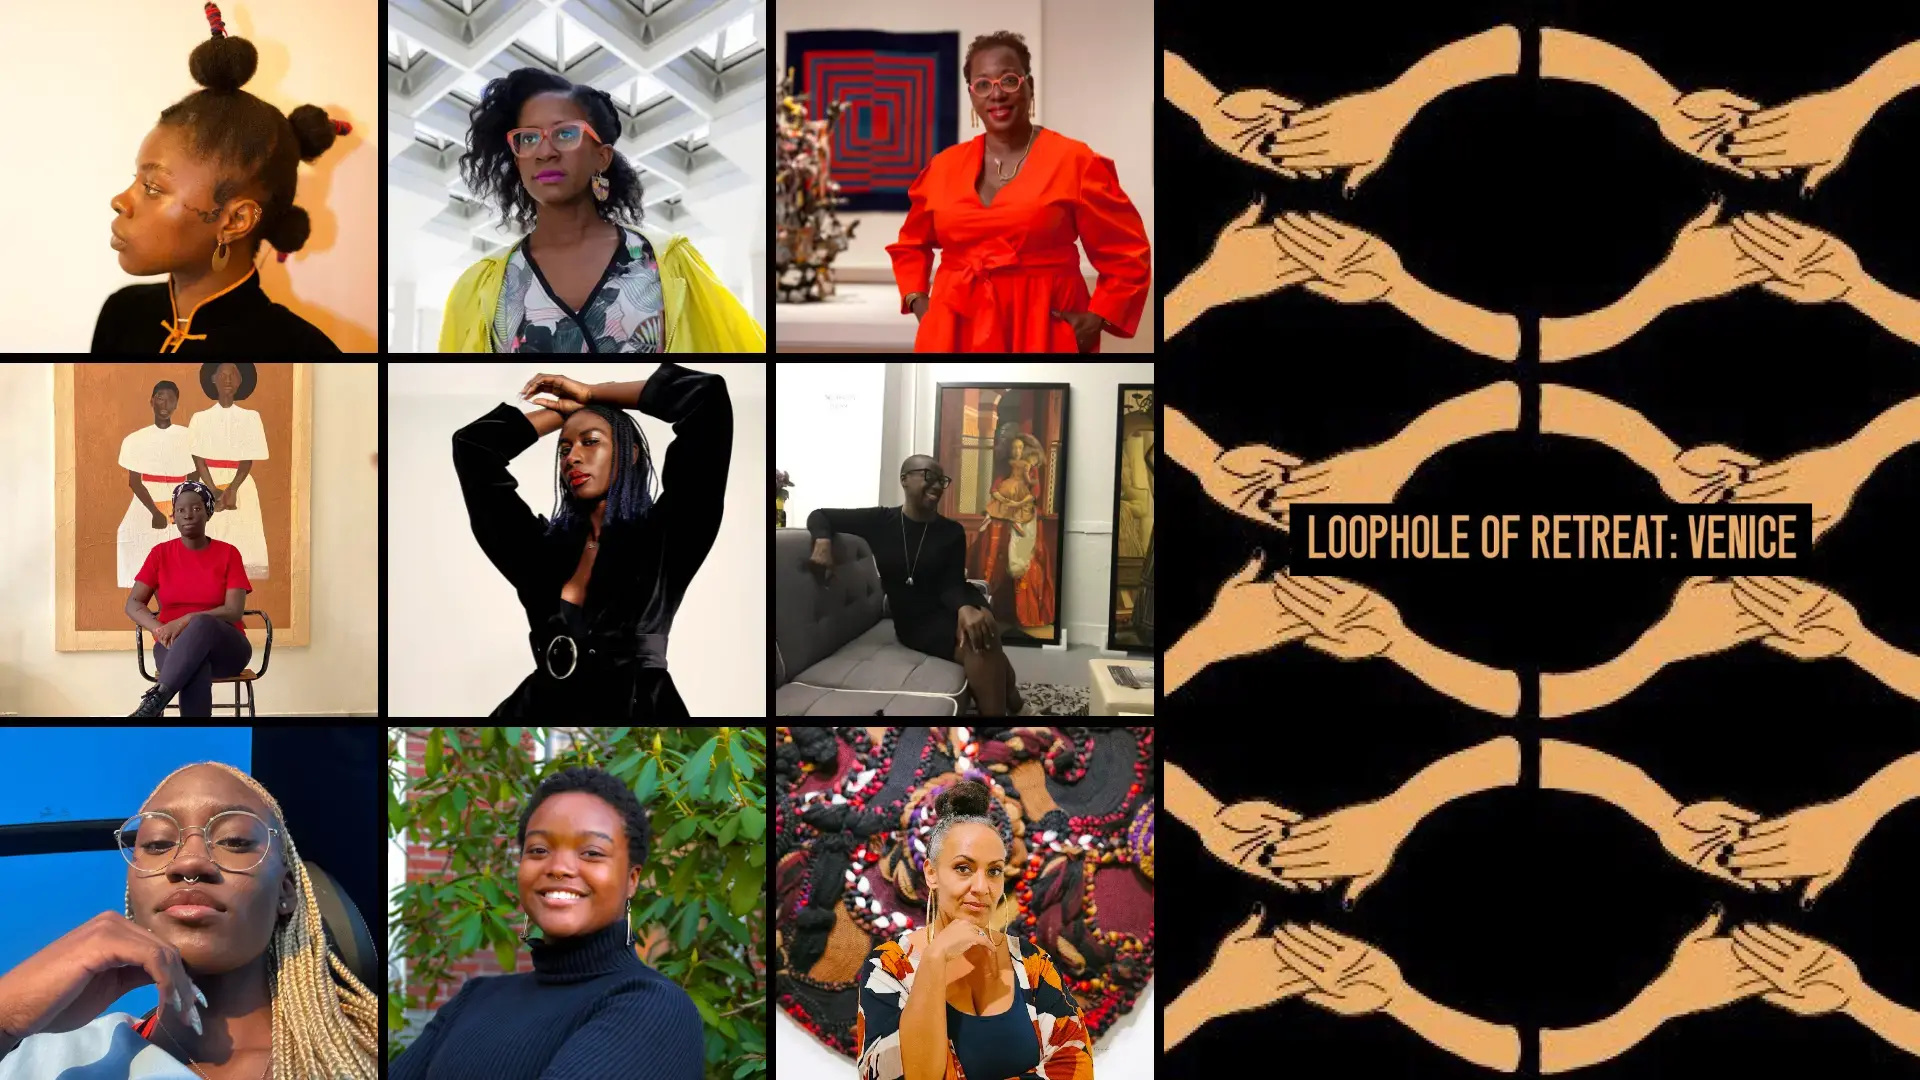 Portraits of nine people in a gridded format (left); Loophole of Retreat: Venice flyer (right)